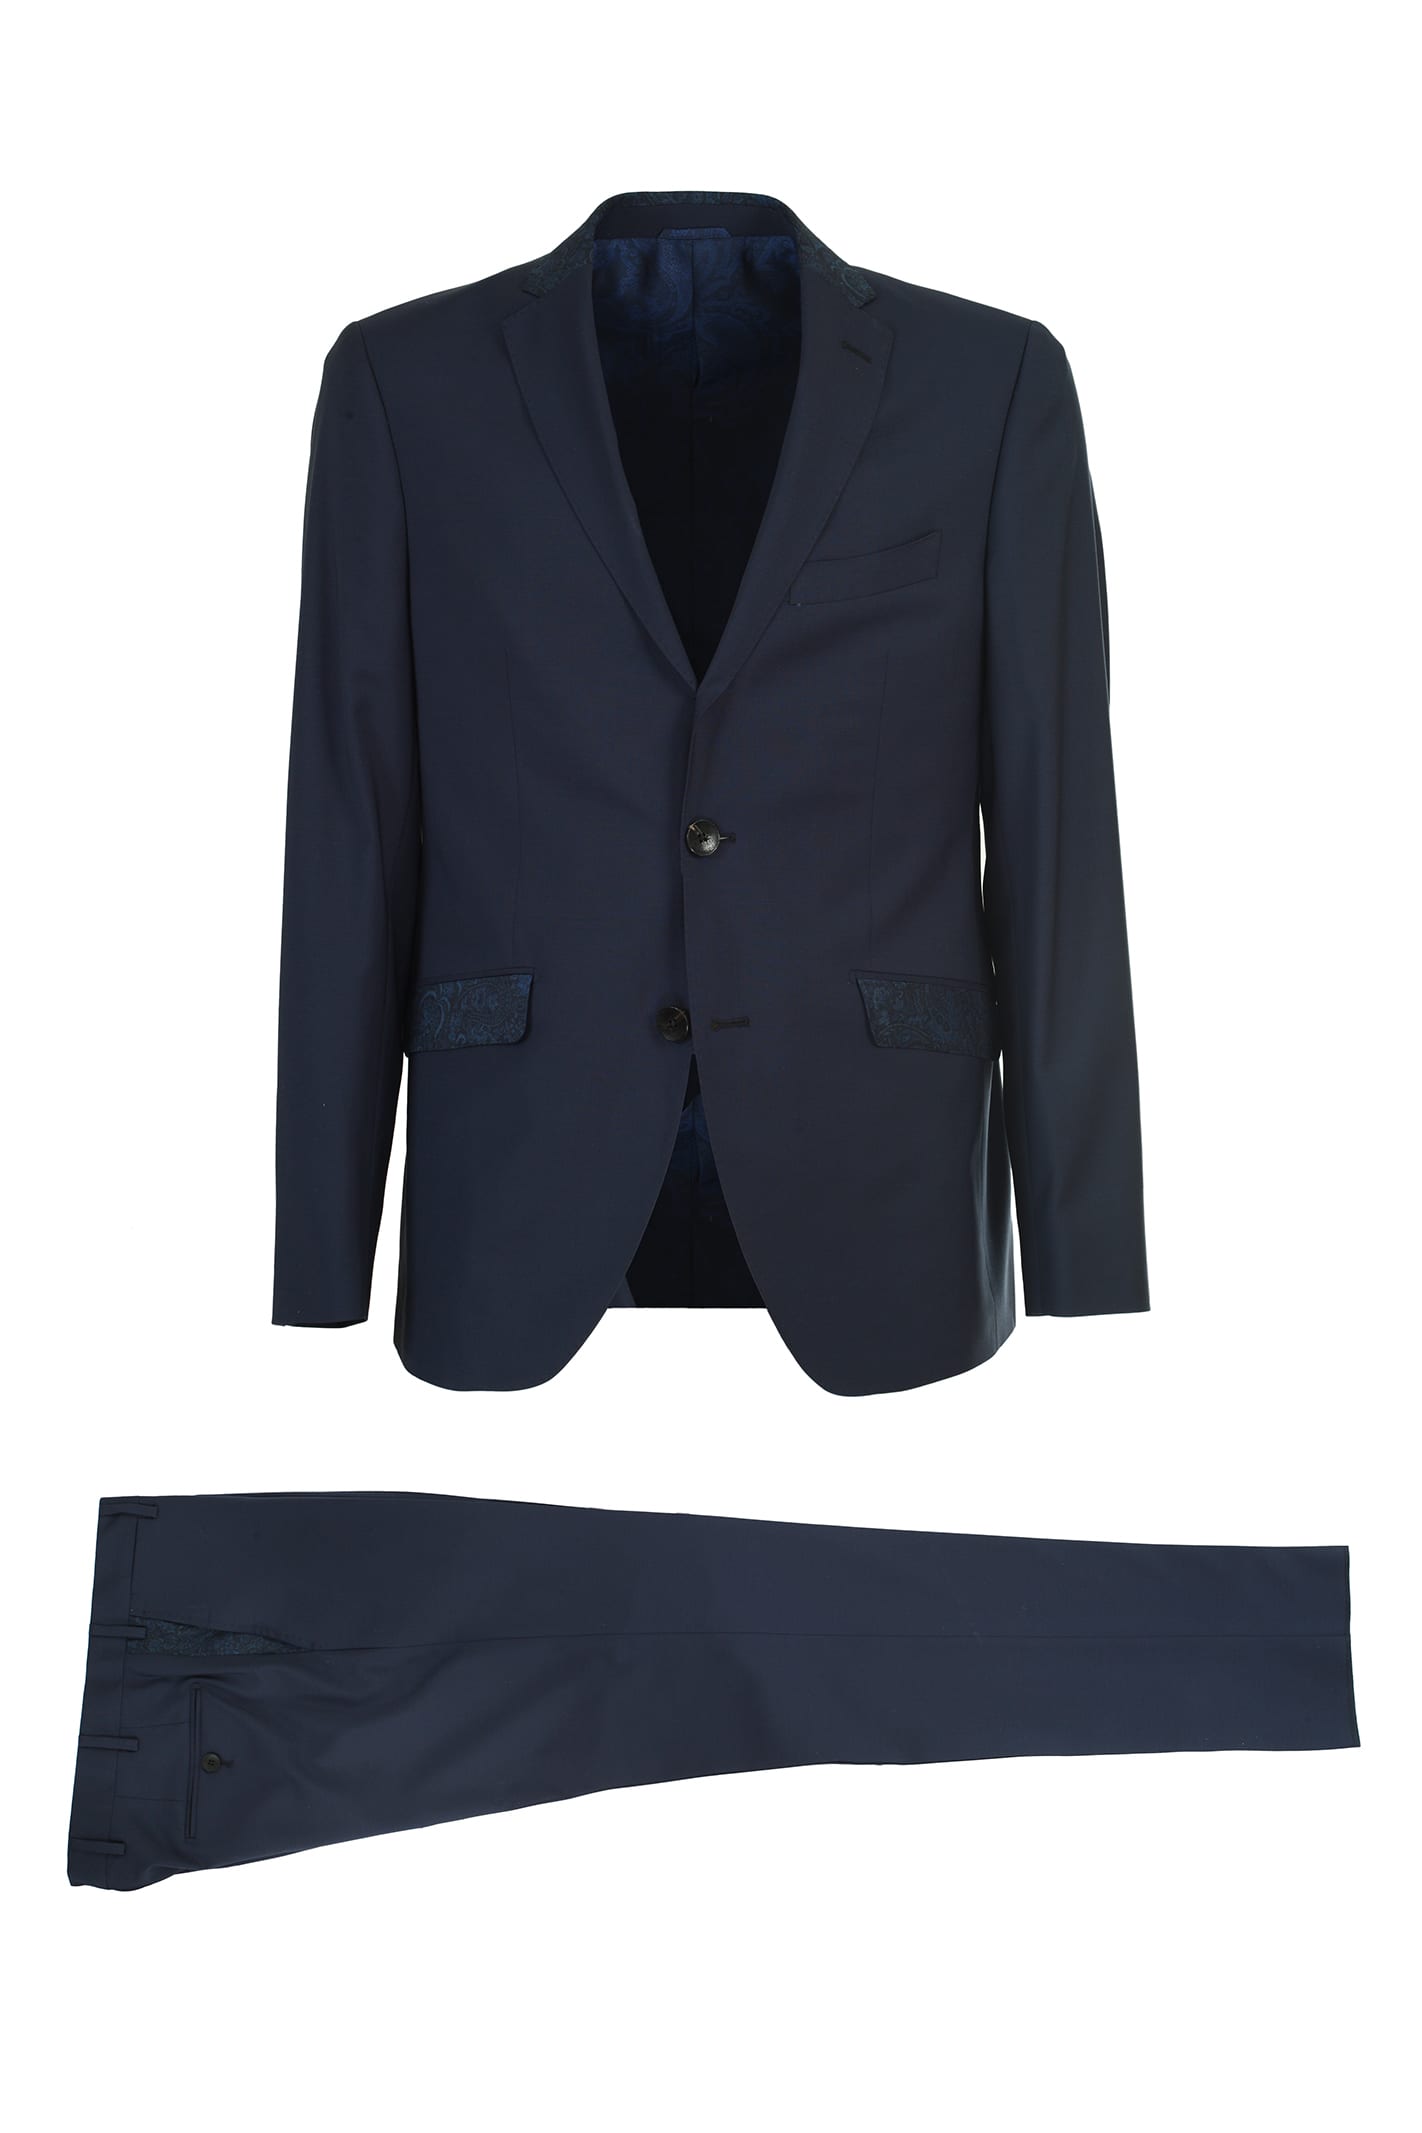 ETRO SINGLE-BREASTED WOOL SUIT,1A907 8223 0200